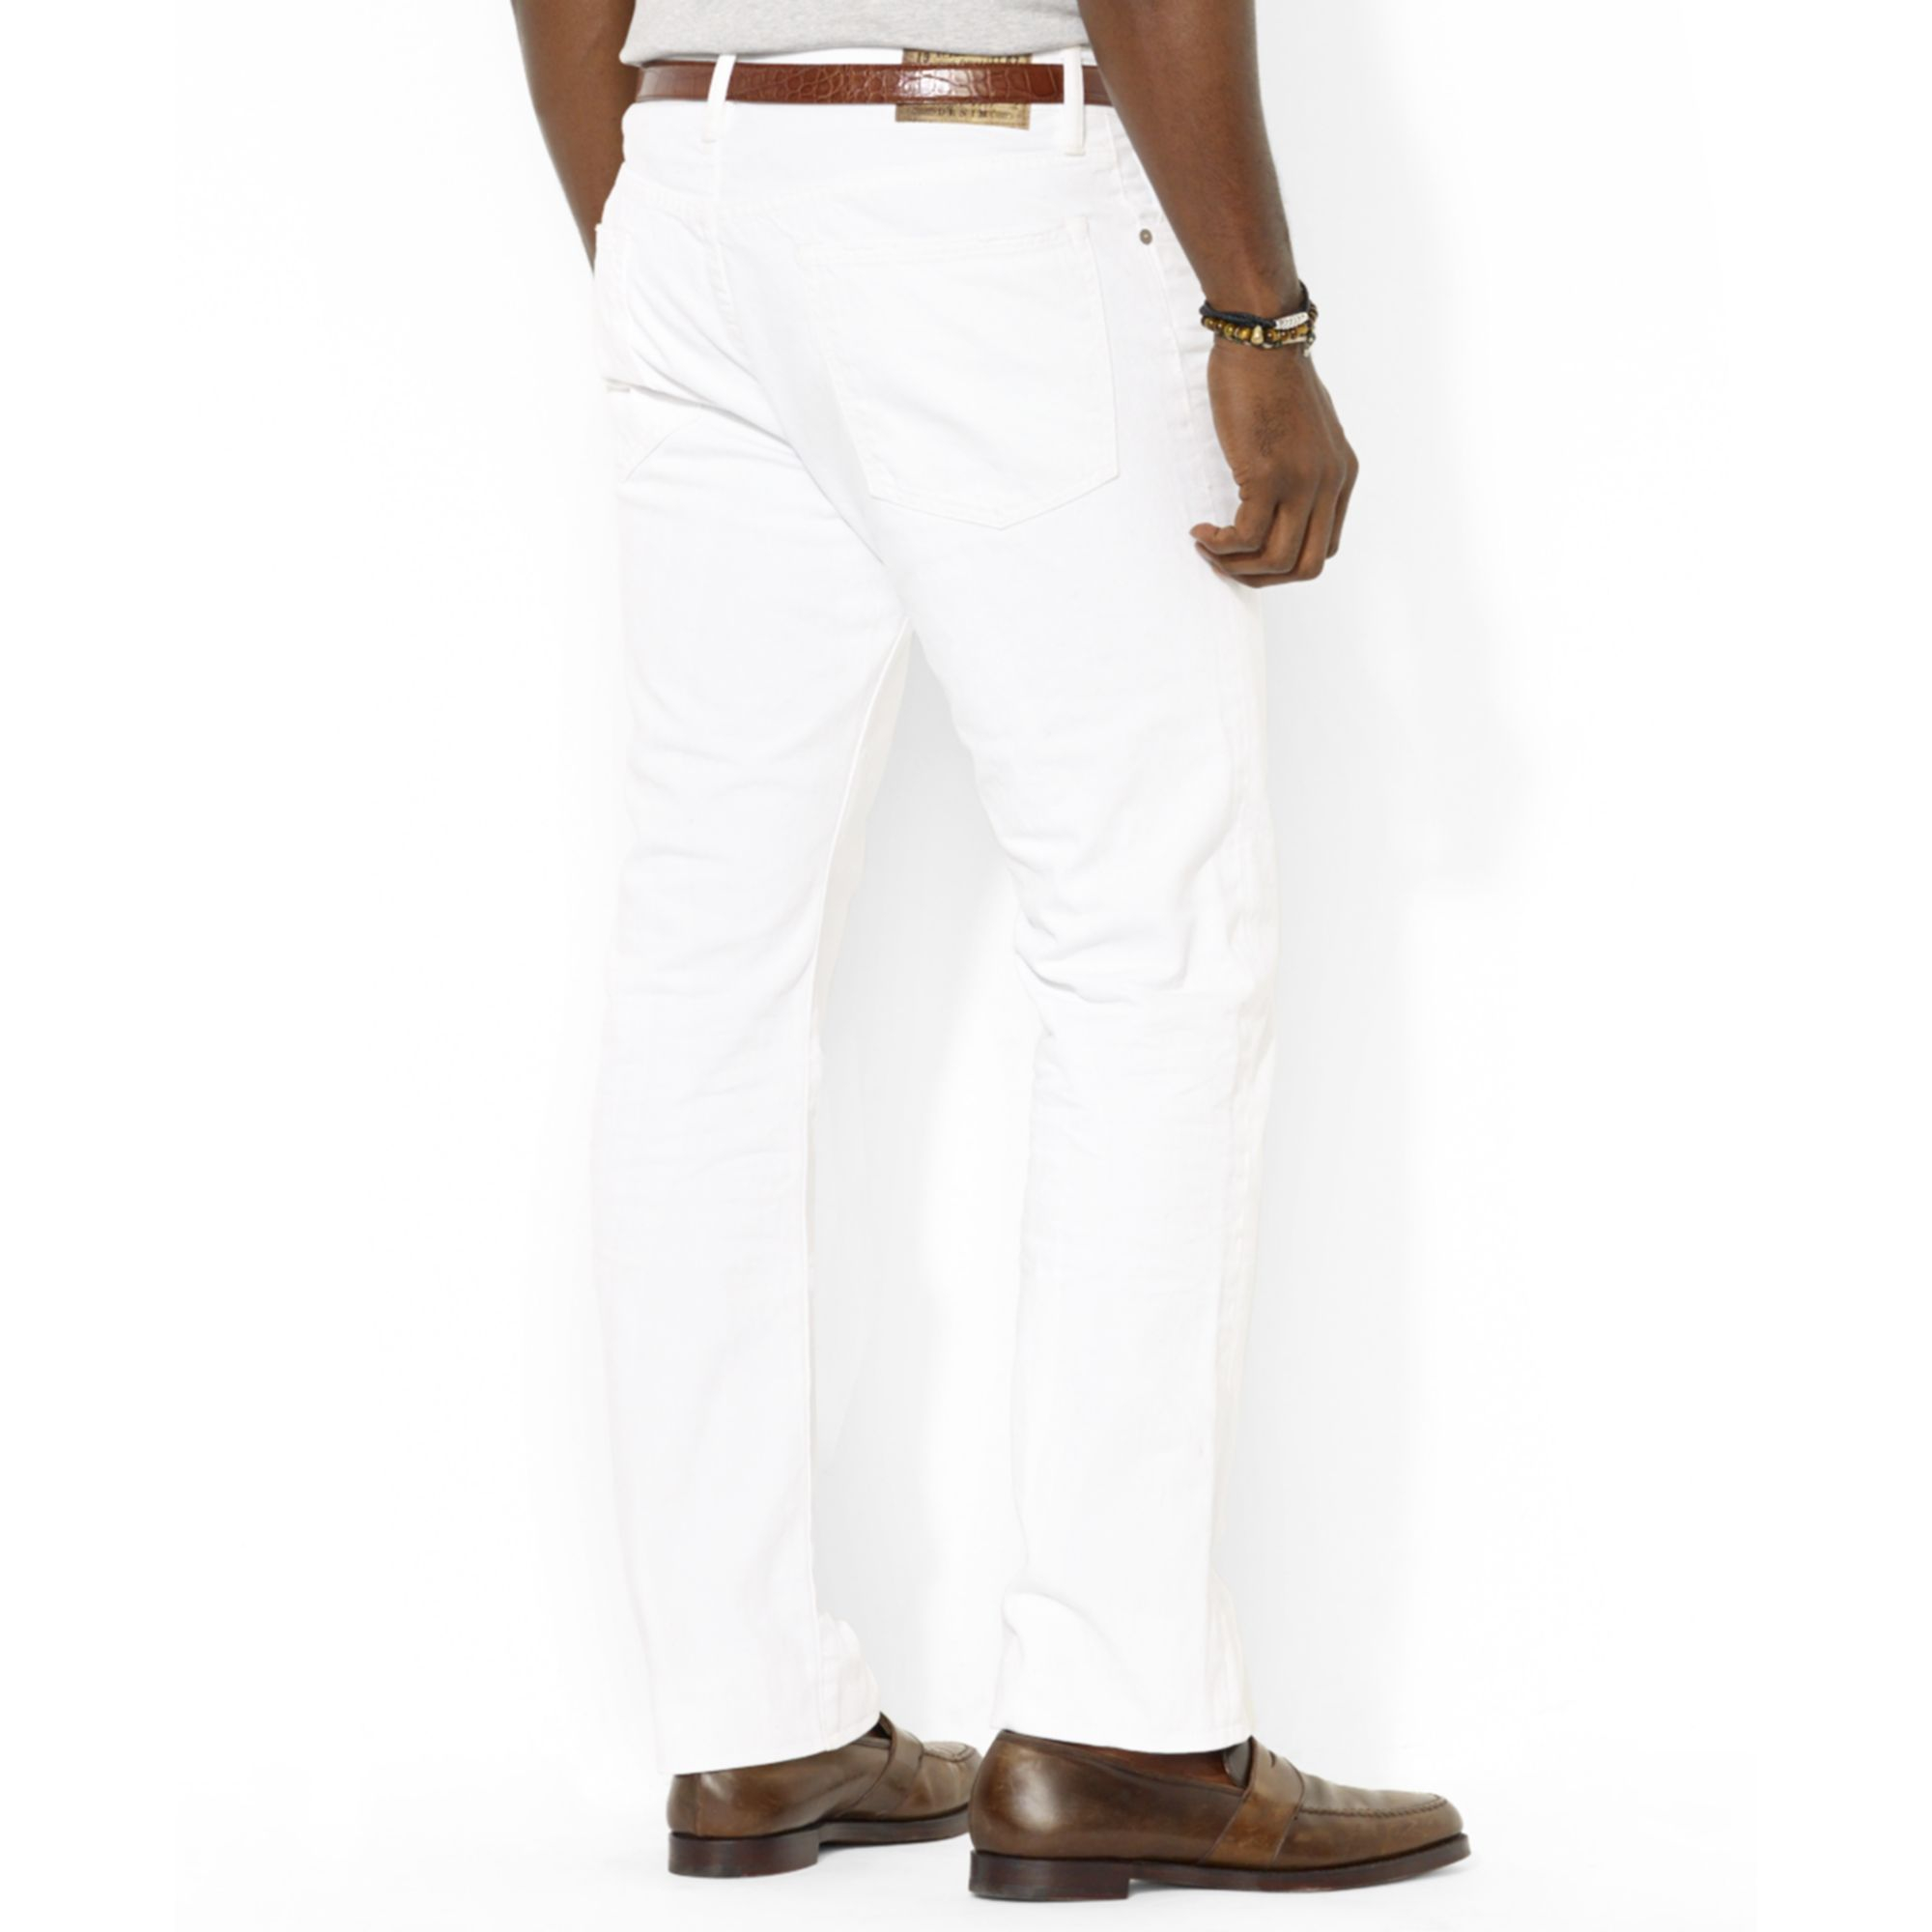 Lyst - Polo Ralph Lauren Polo Big and Tall Classicfit Hudson White ...